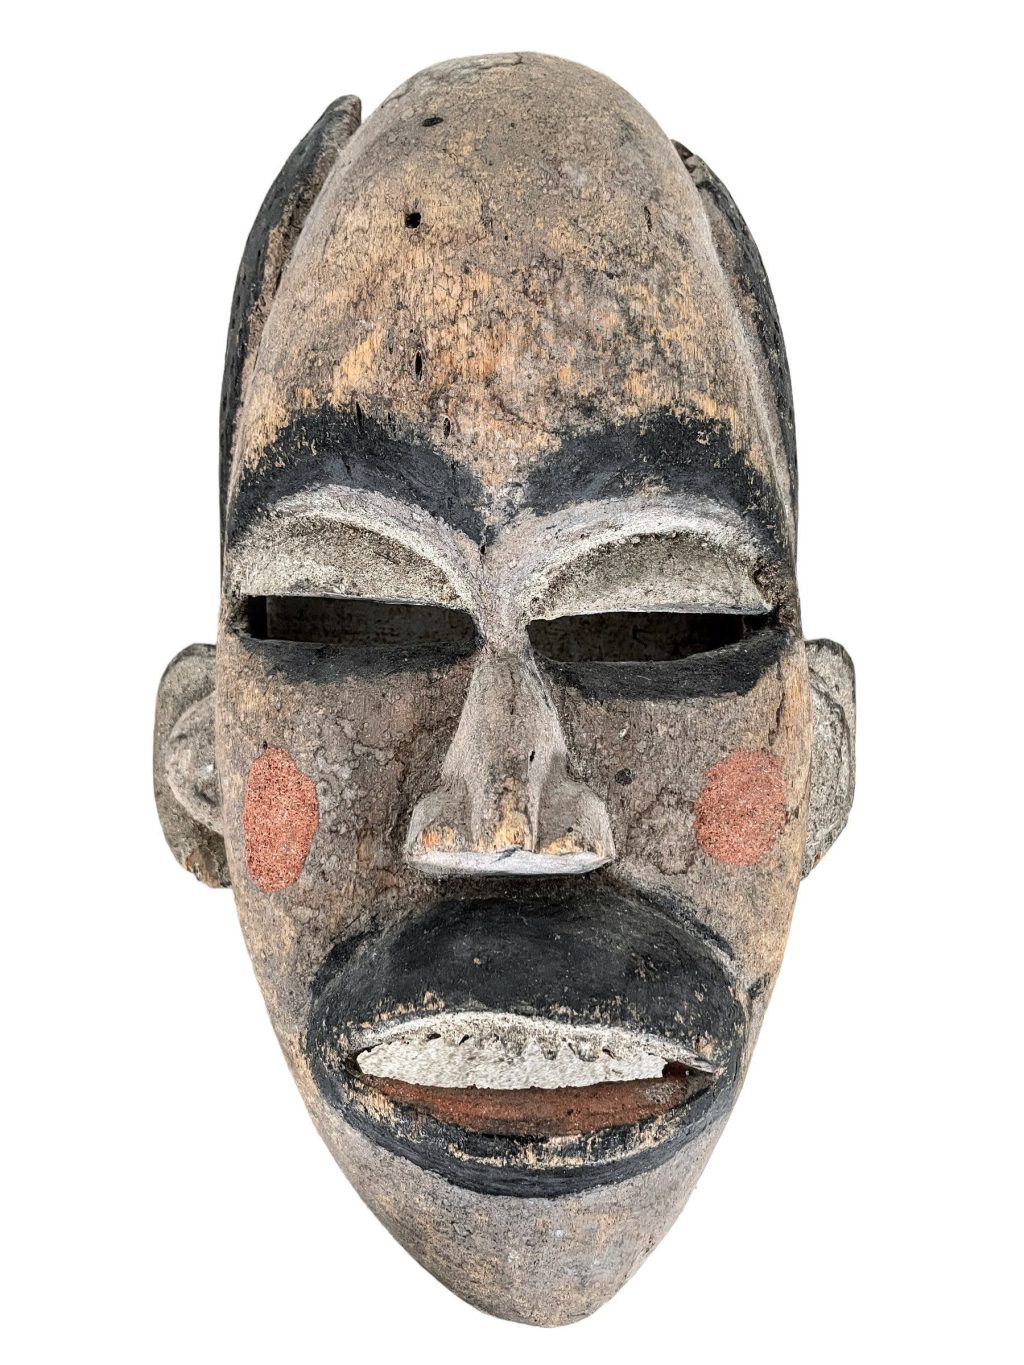 Vintage African North Congo Bateke Decor Wooden Bust Mask Wall Decor Intricate Carved Statue Carving Sculpture Wood Tribal Art c1970’s